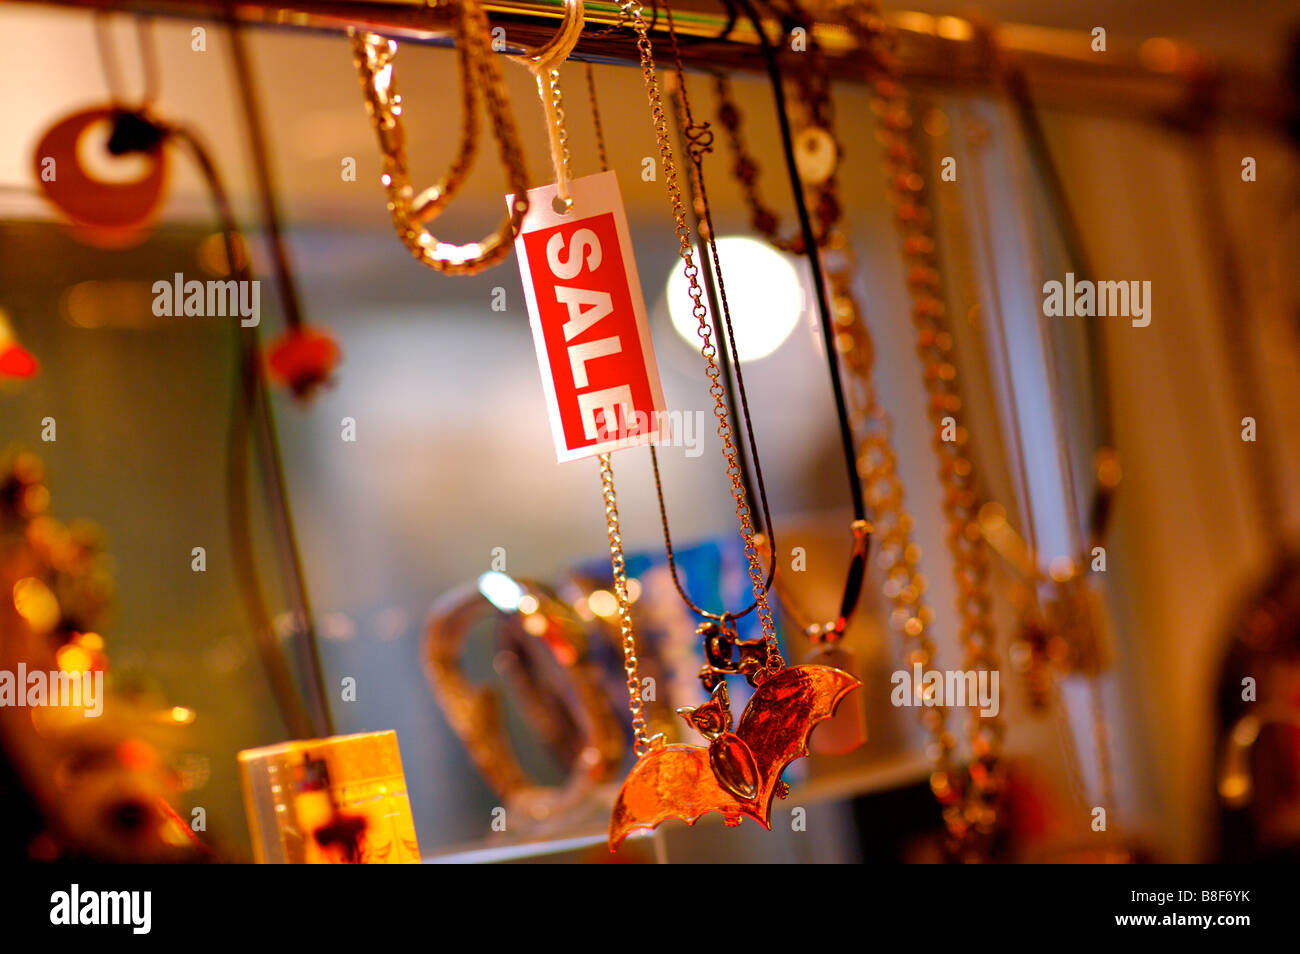 Red and white Sale sign hanging among necklaces in a store Stock Photo